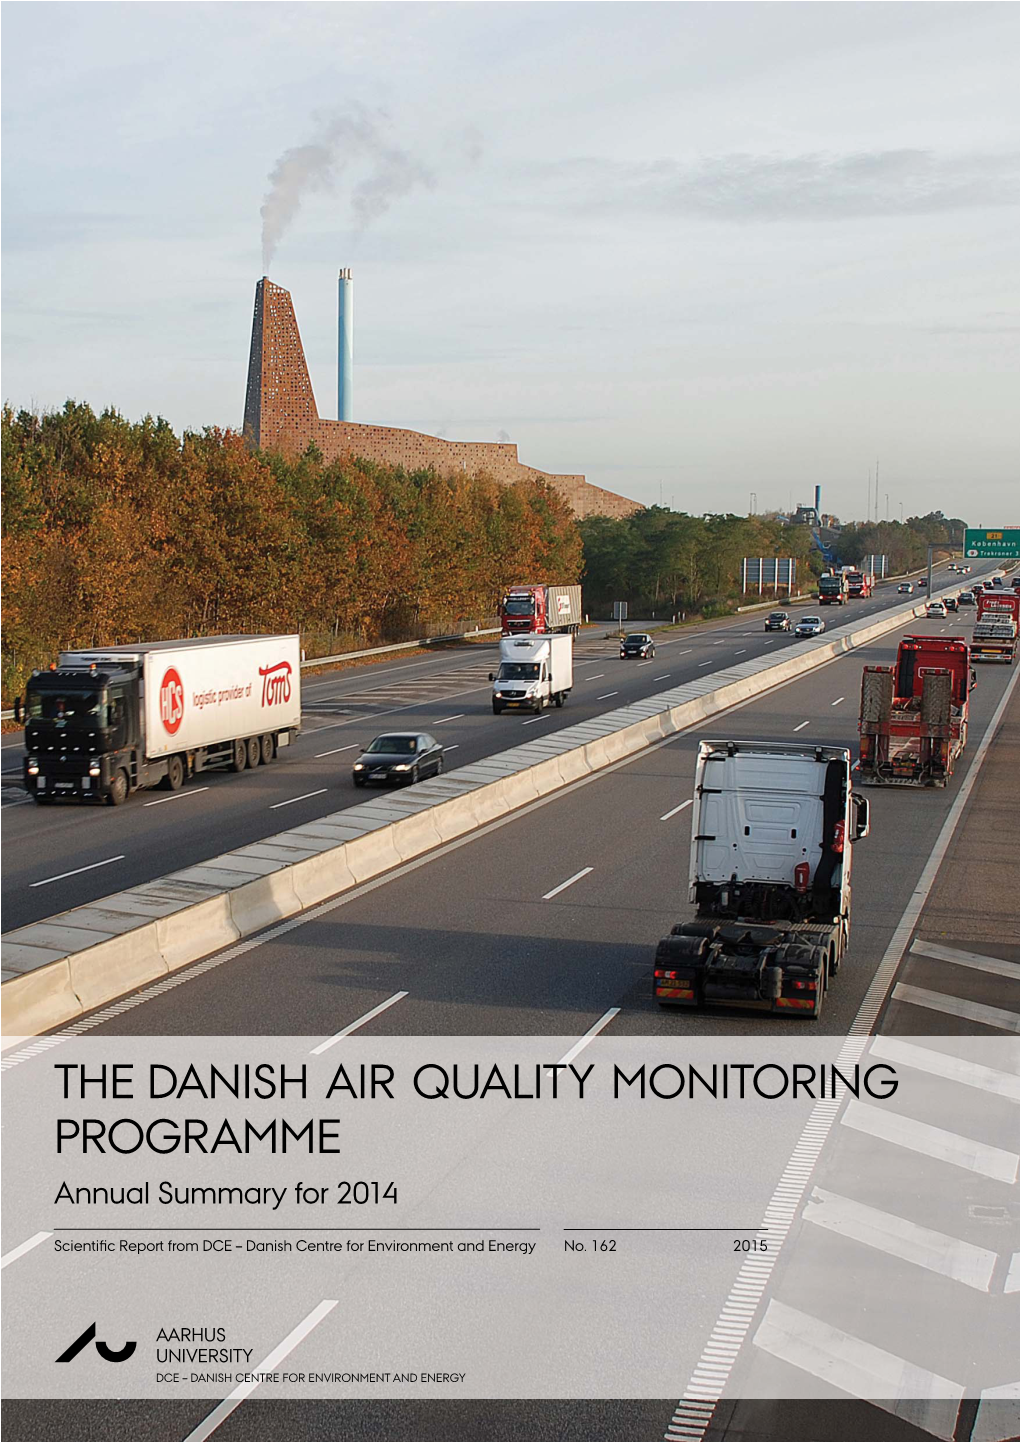 THE DANISH AIR QUALITY MONITORING PROGRAMME Annual Summary for 2014